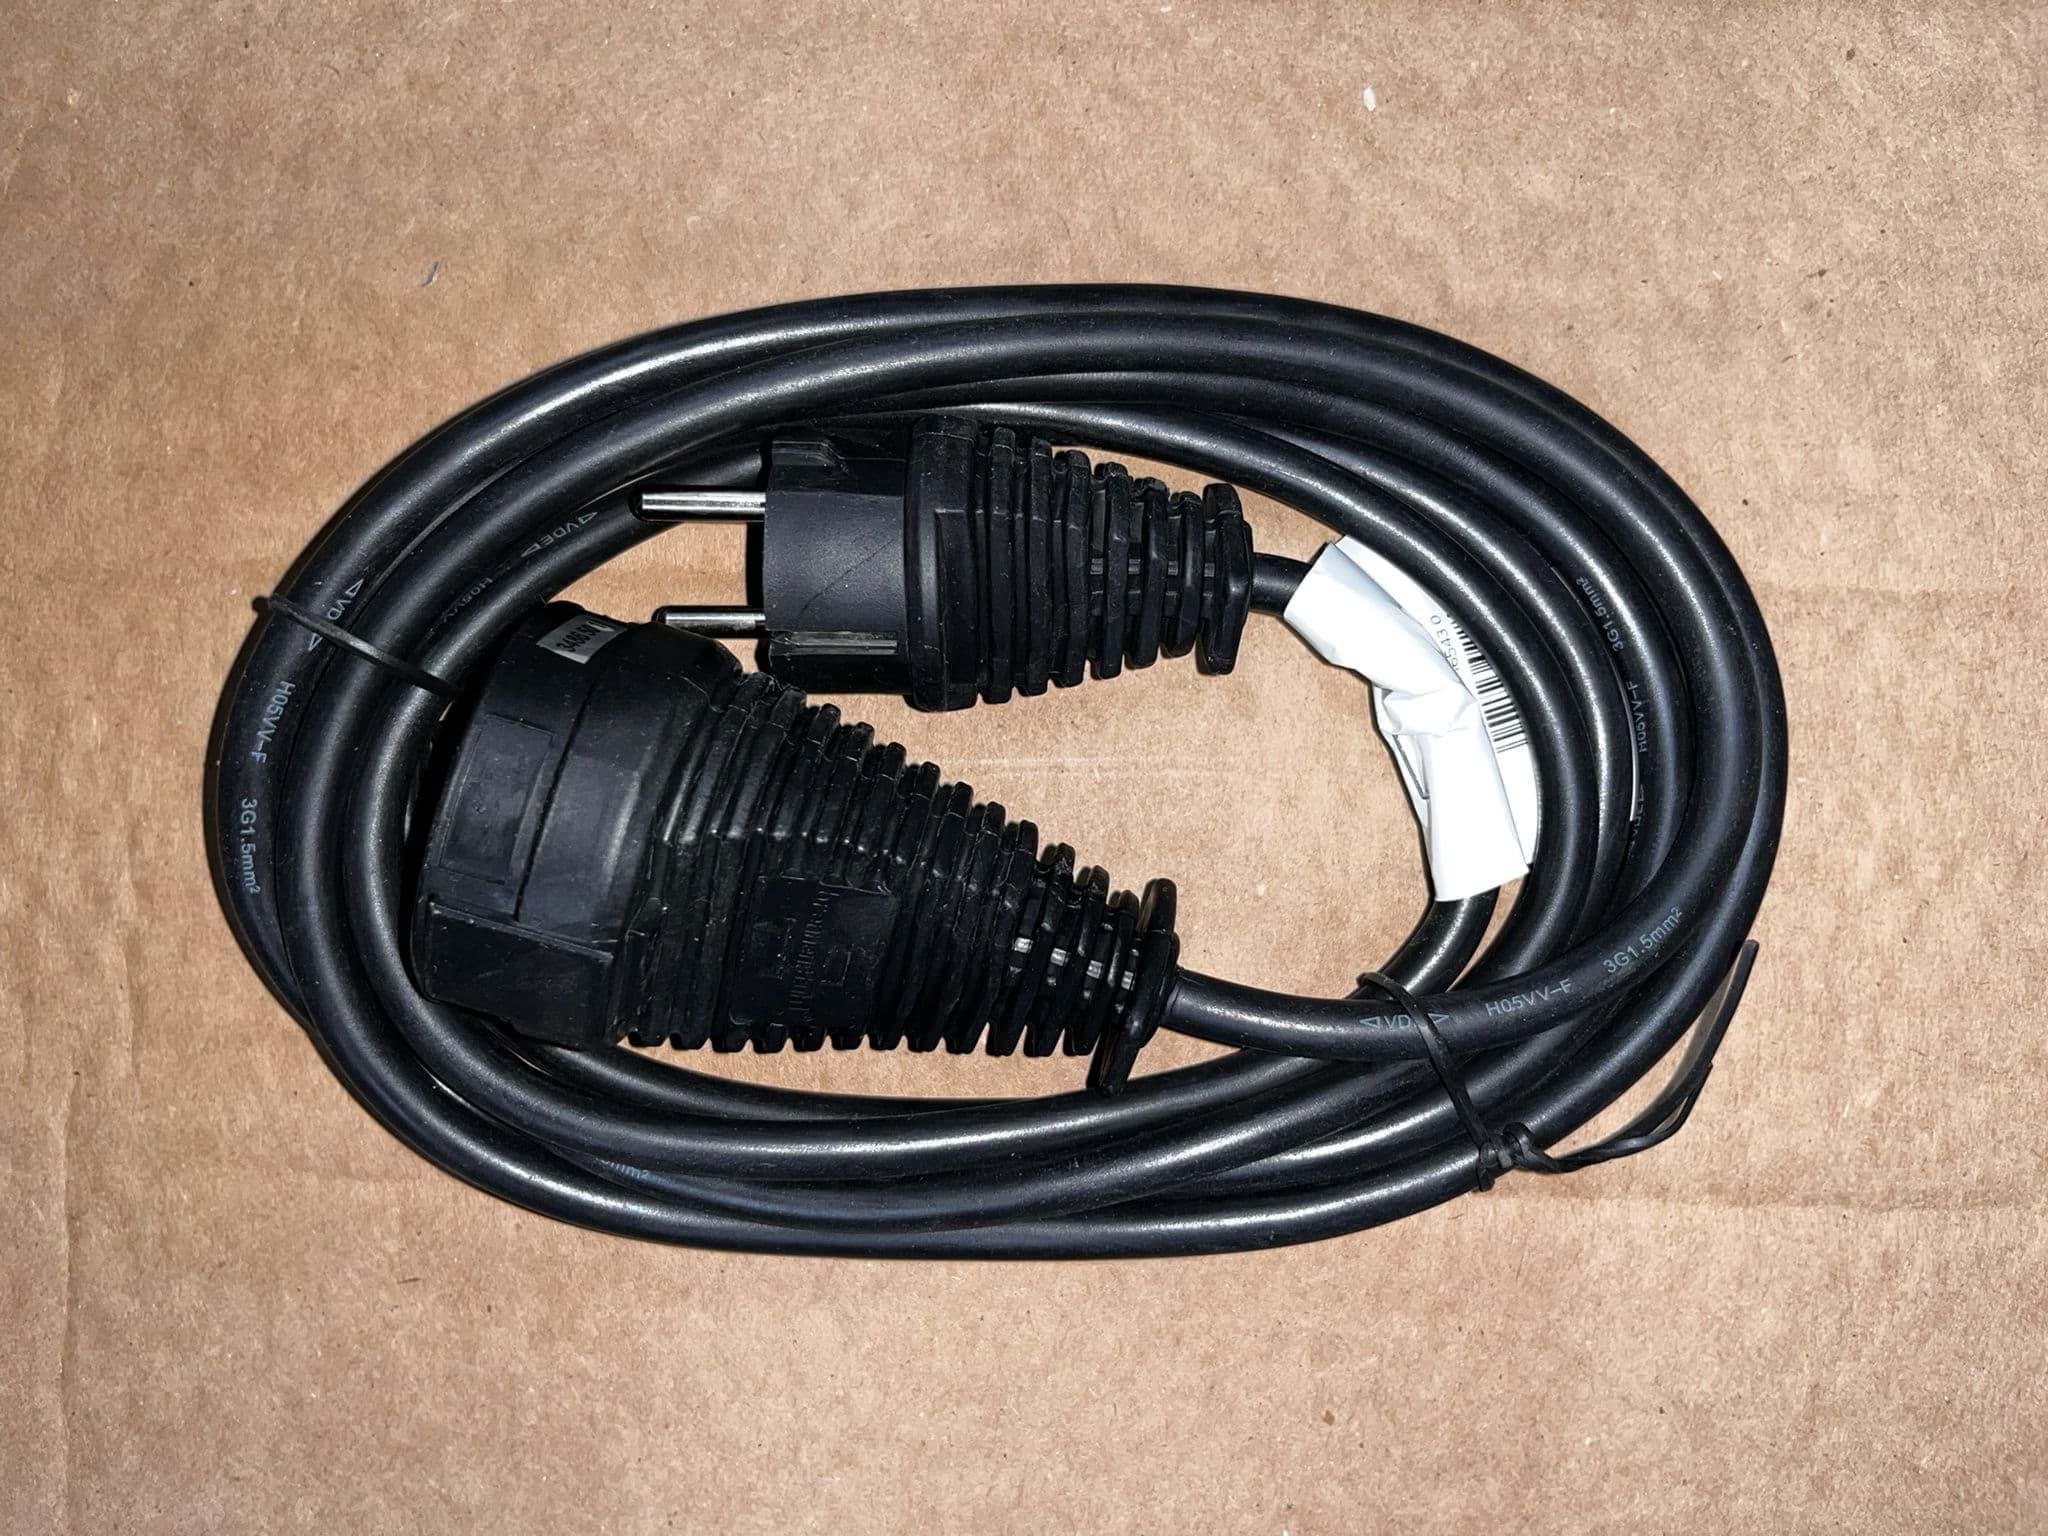 Picture of [OT] Ac Power Cord Waterproof 3mtr